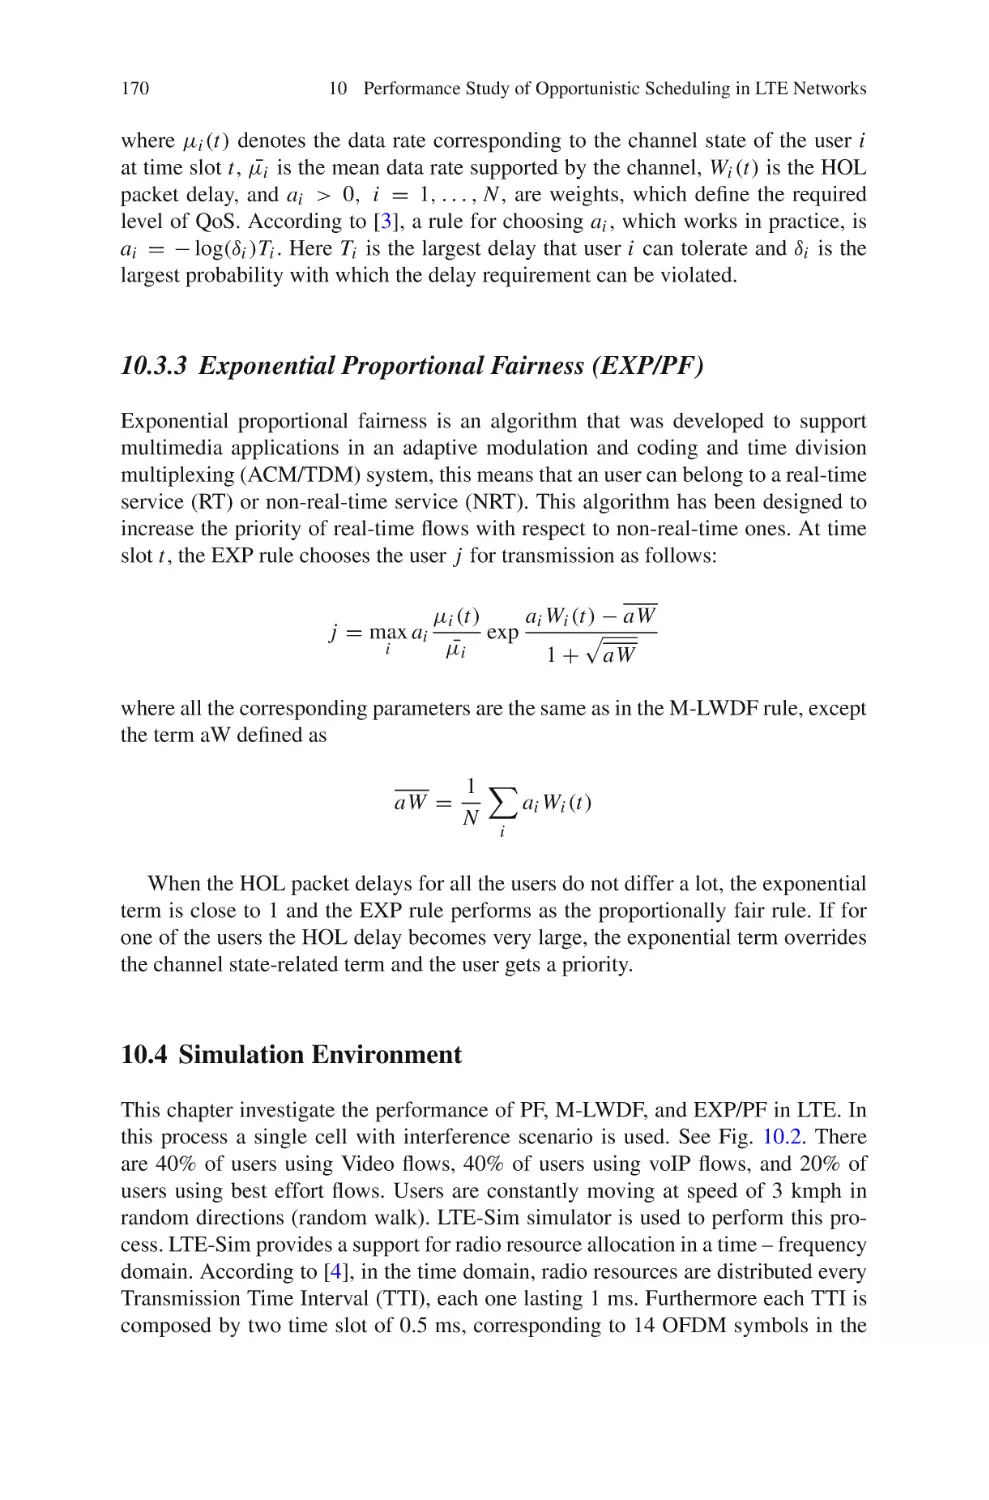 10.3.3  Exponential Proportional Fairness (EXP/PF)
10.4  Simulation Environment